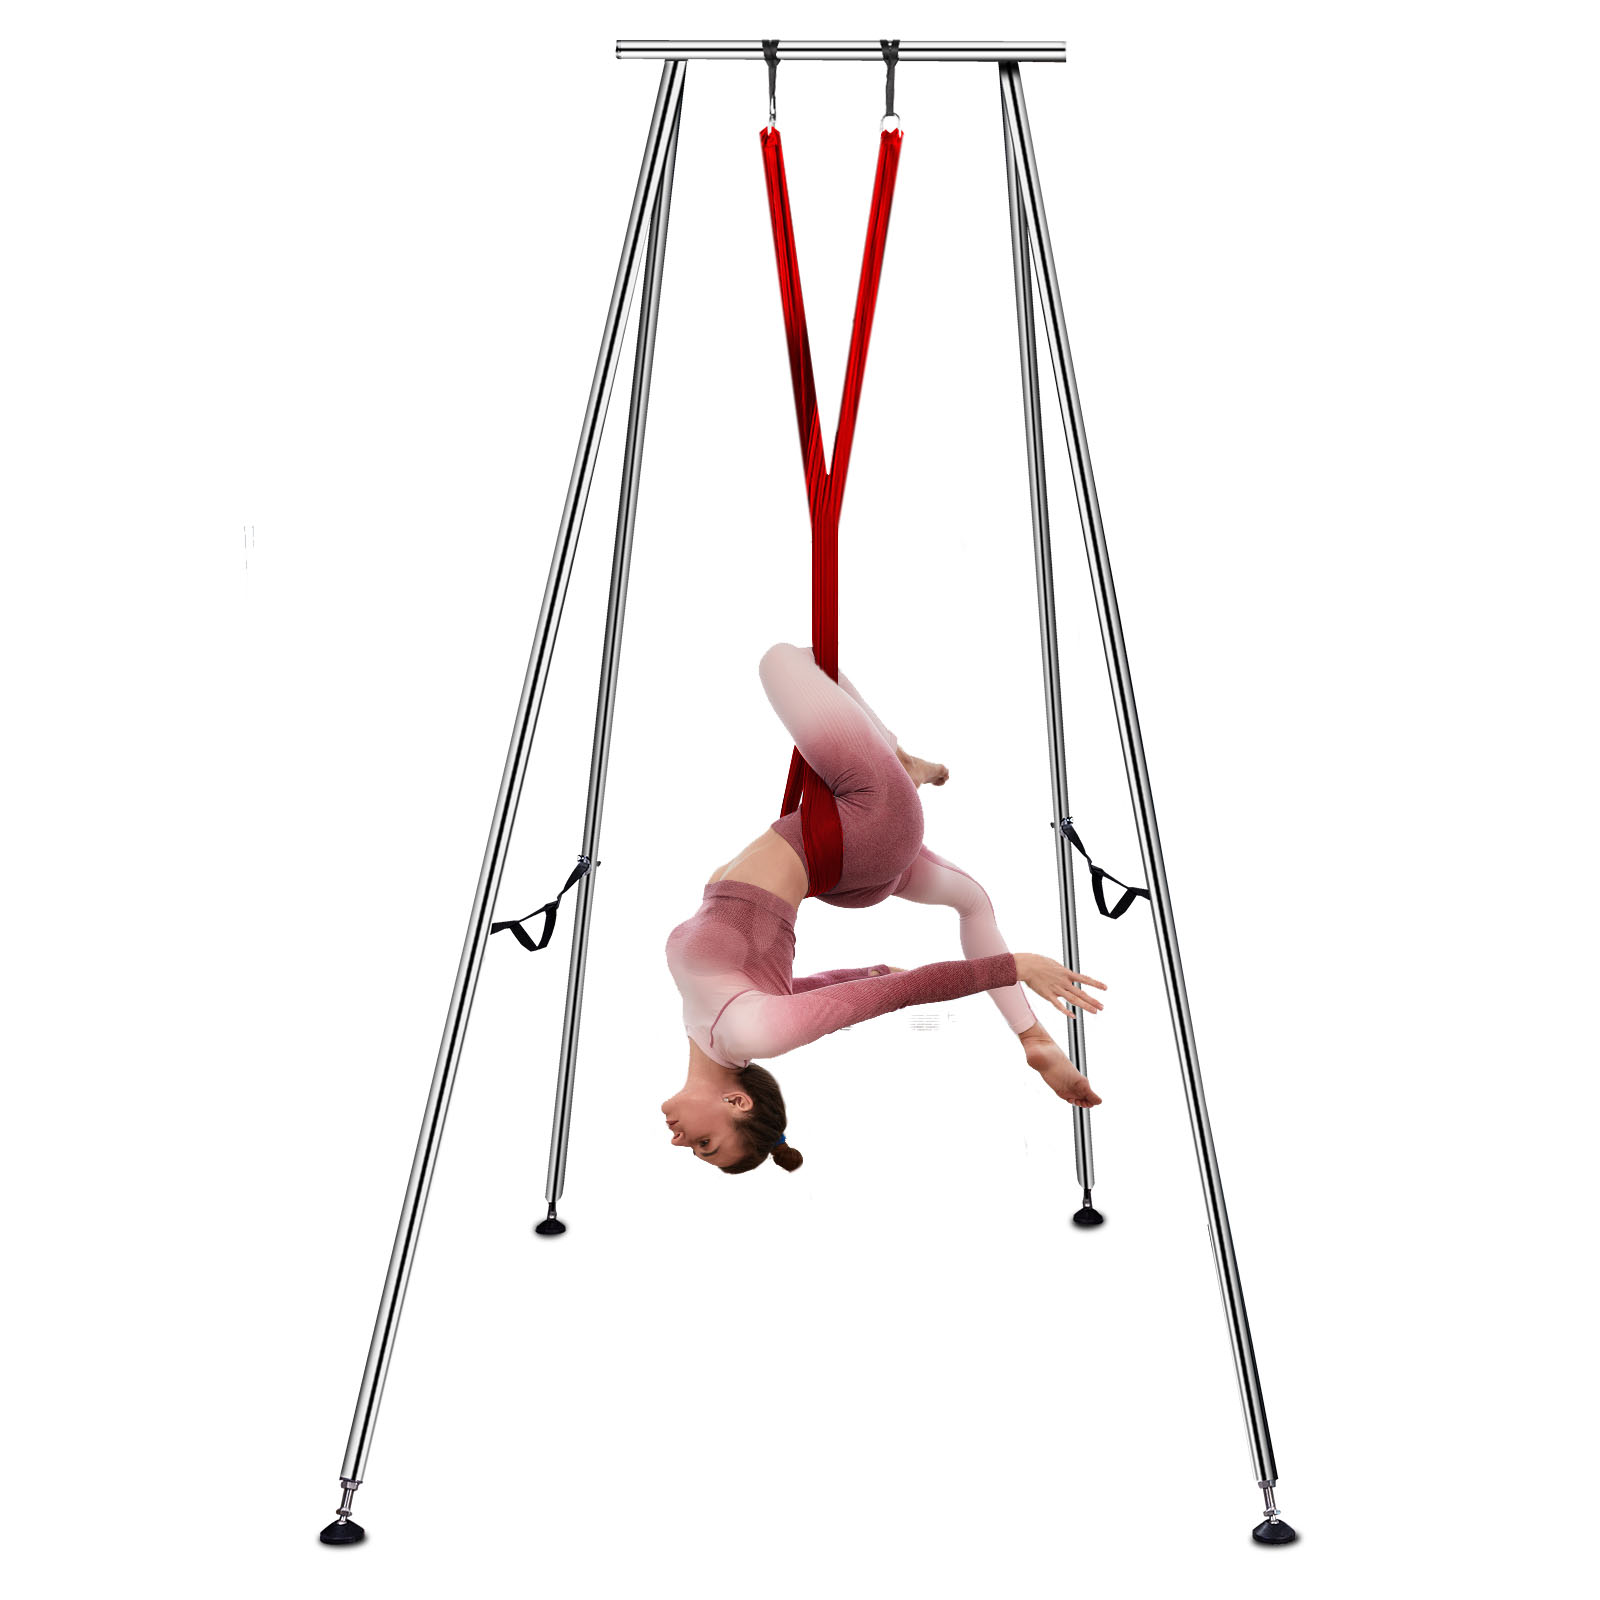 Aerial Yoga Frame,Portable,Indoor Outdoor Exercise